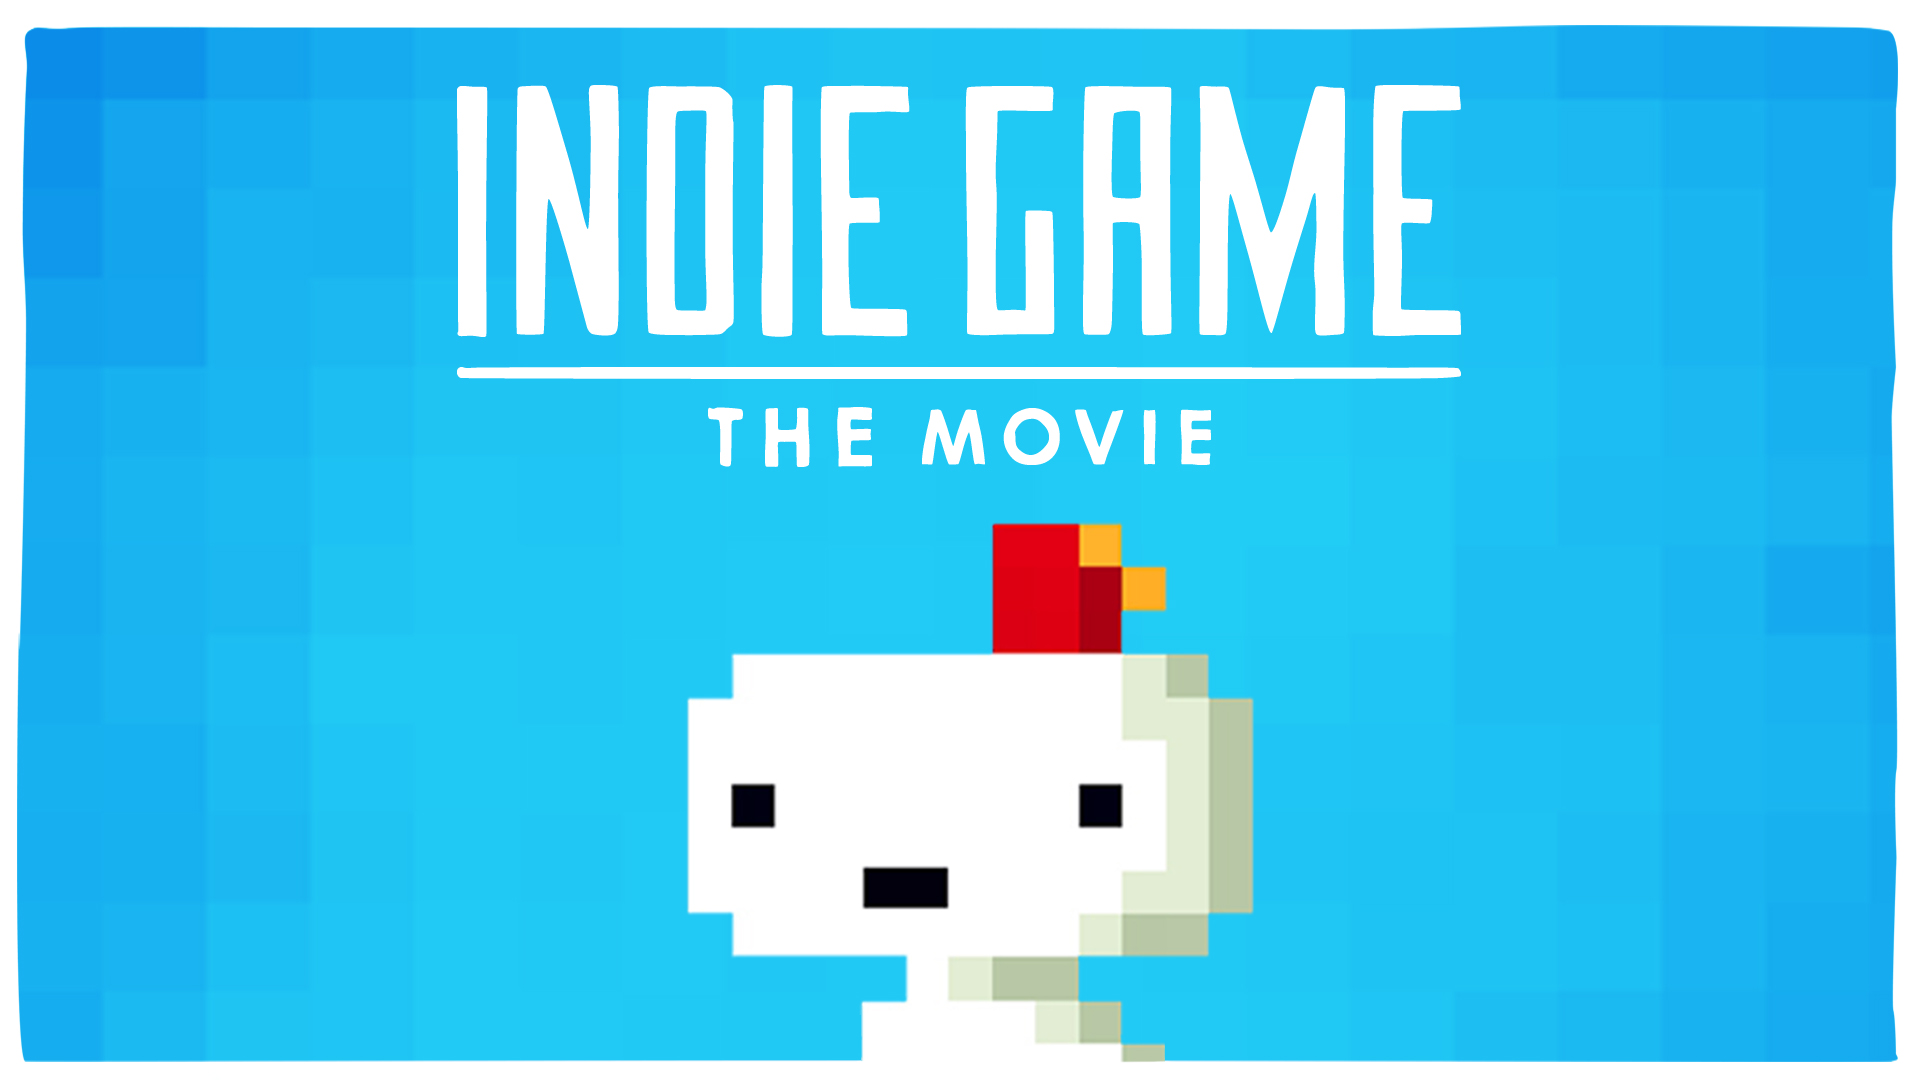 42-facts-about-the-movie-indie-game-the-movie